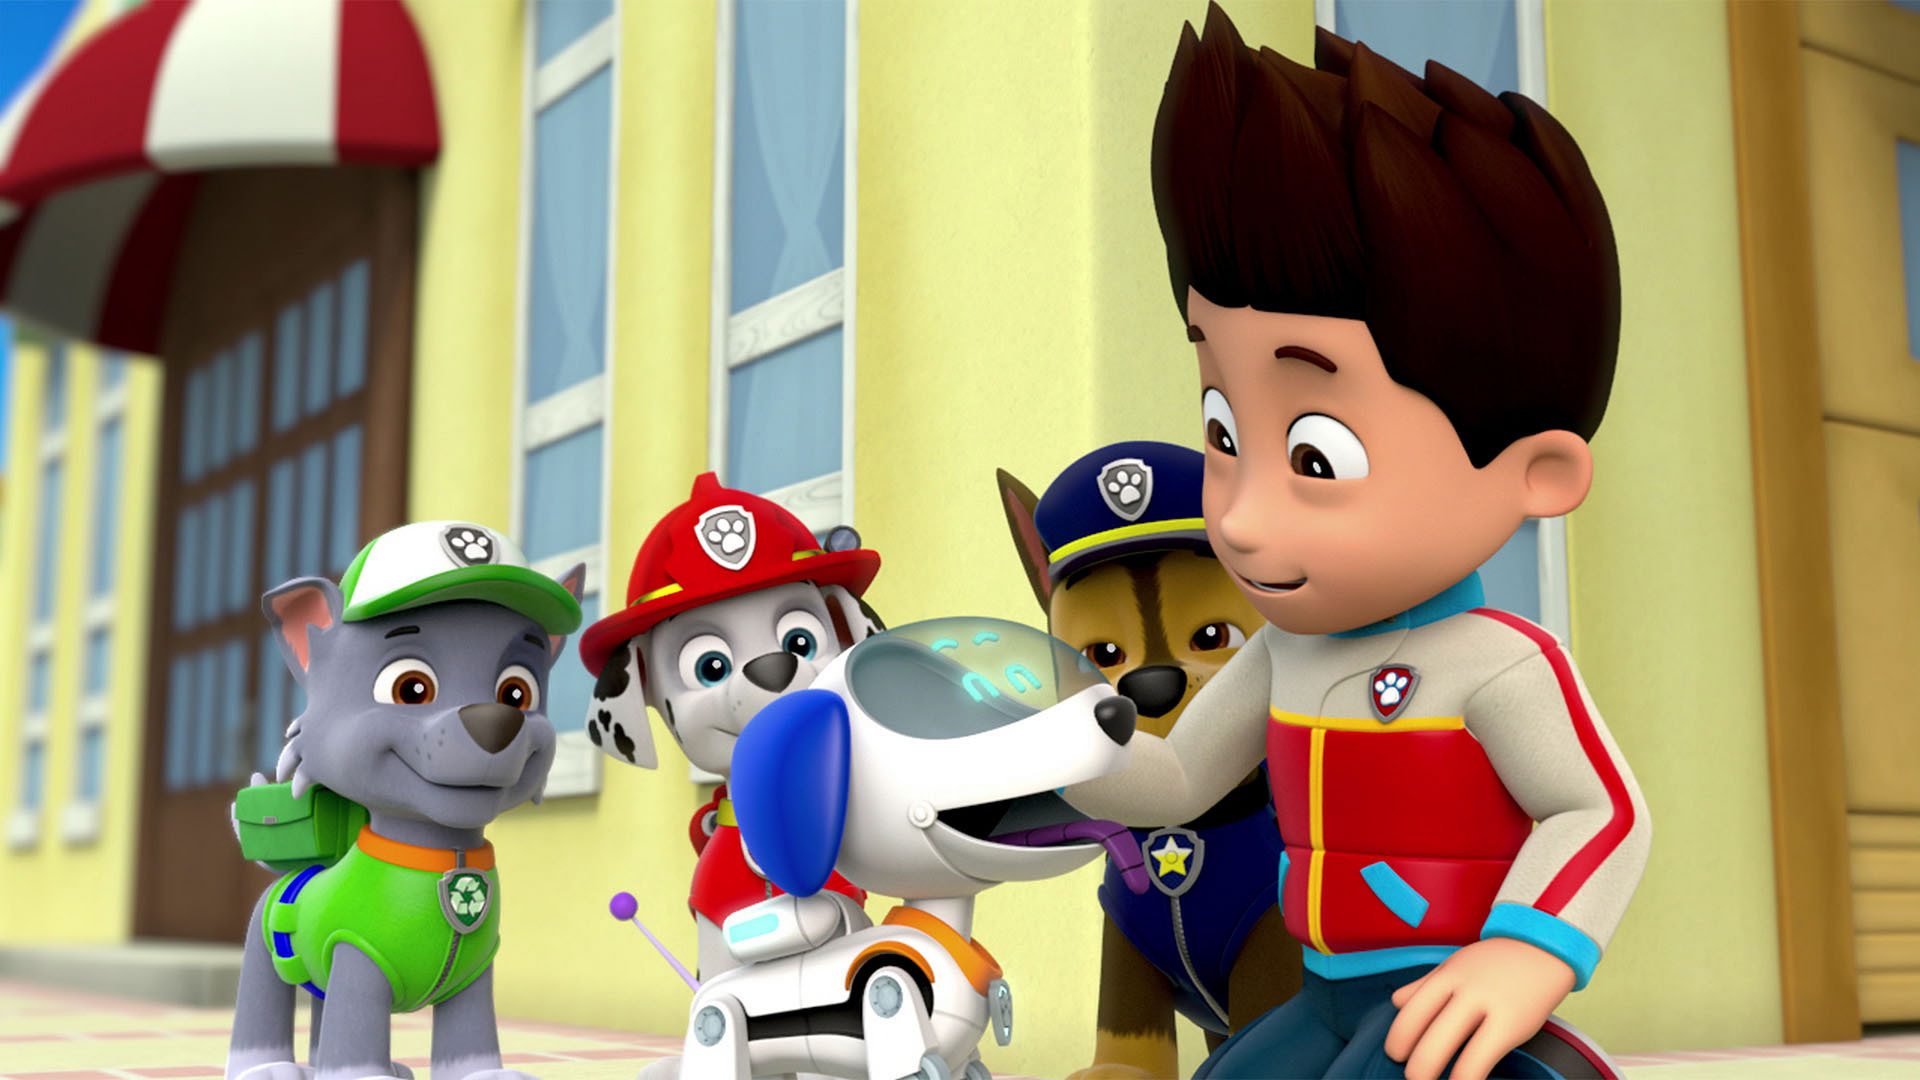 Watch Paw Patrol Season 1 Episode 19 Pups Save A Super Pup Full Show